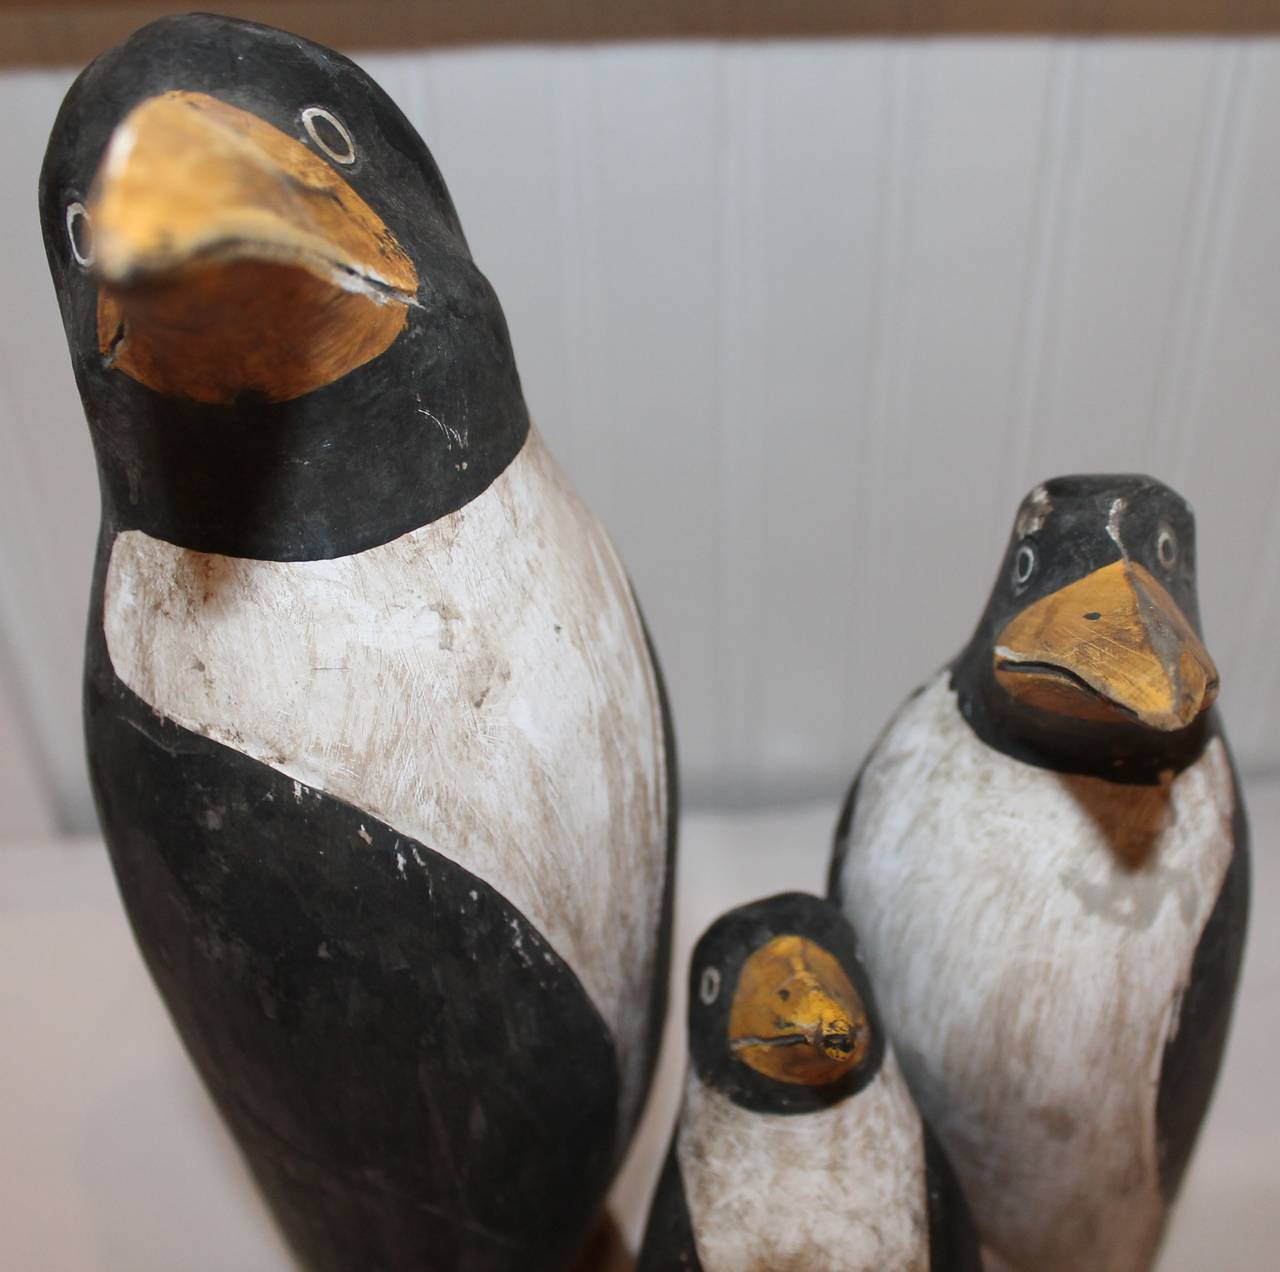 These hand-carved and painted Folk Art penguin’s come from a wonderful and whimsical Folk Art collection in Beverly Hills, California. The condition are very good with minor nicks and chips consistent with age and wear.